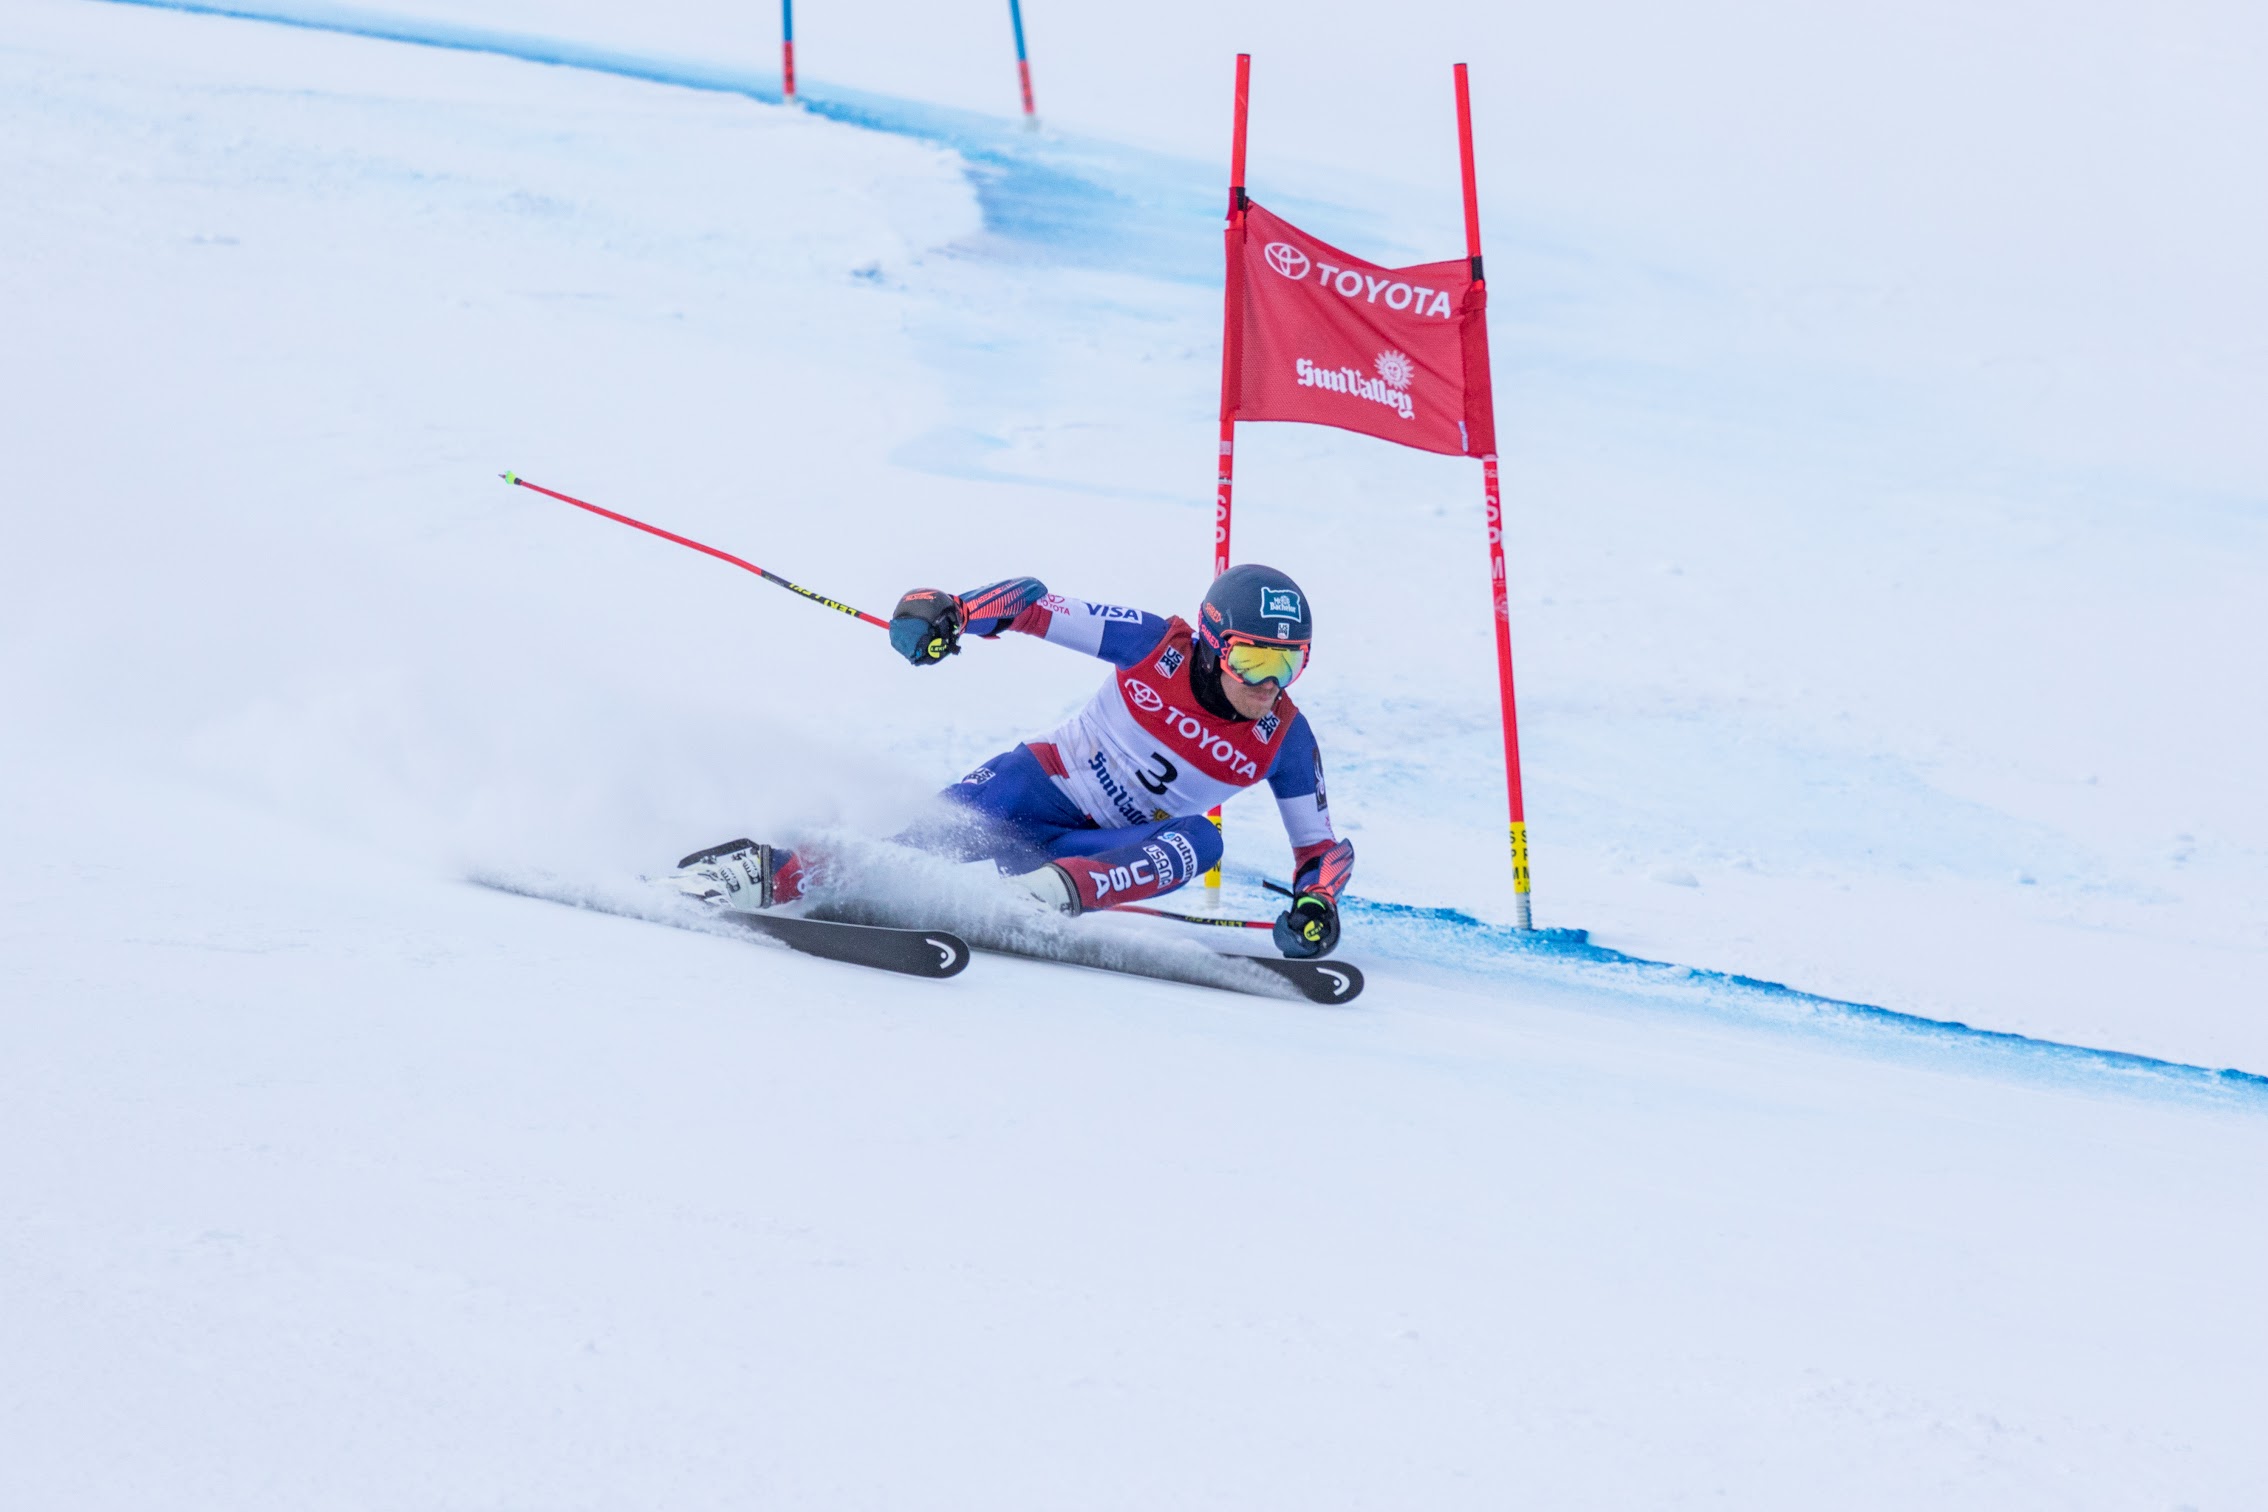 Tommy Ford won his ninth career national title in winning Sunday's giant slalom at the Toyota U.S. Alpine Championships. (Oliver Guy Photo @oliverguyphoto)